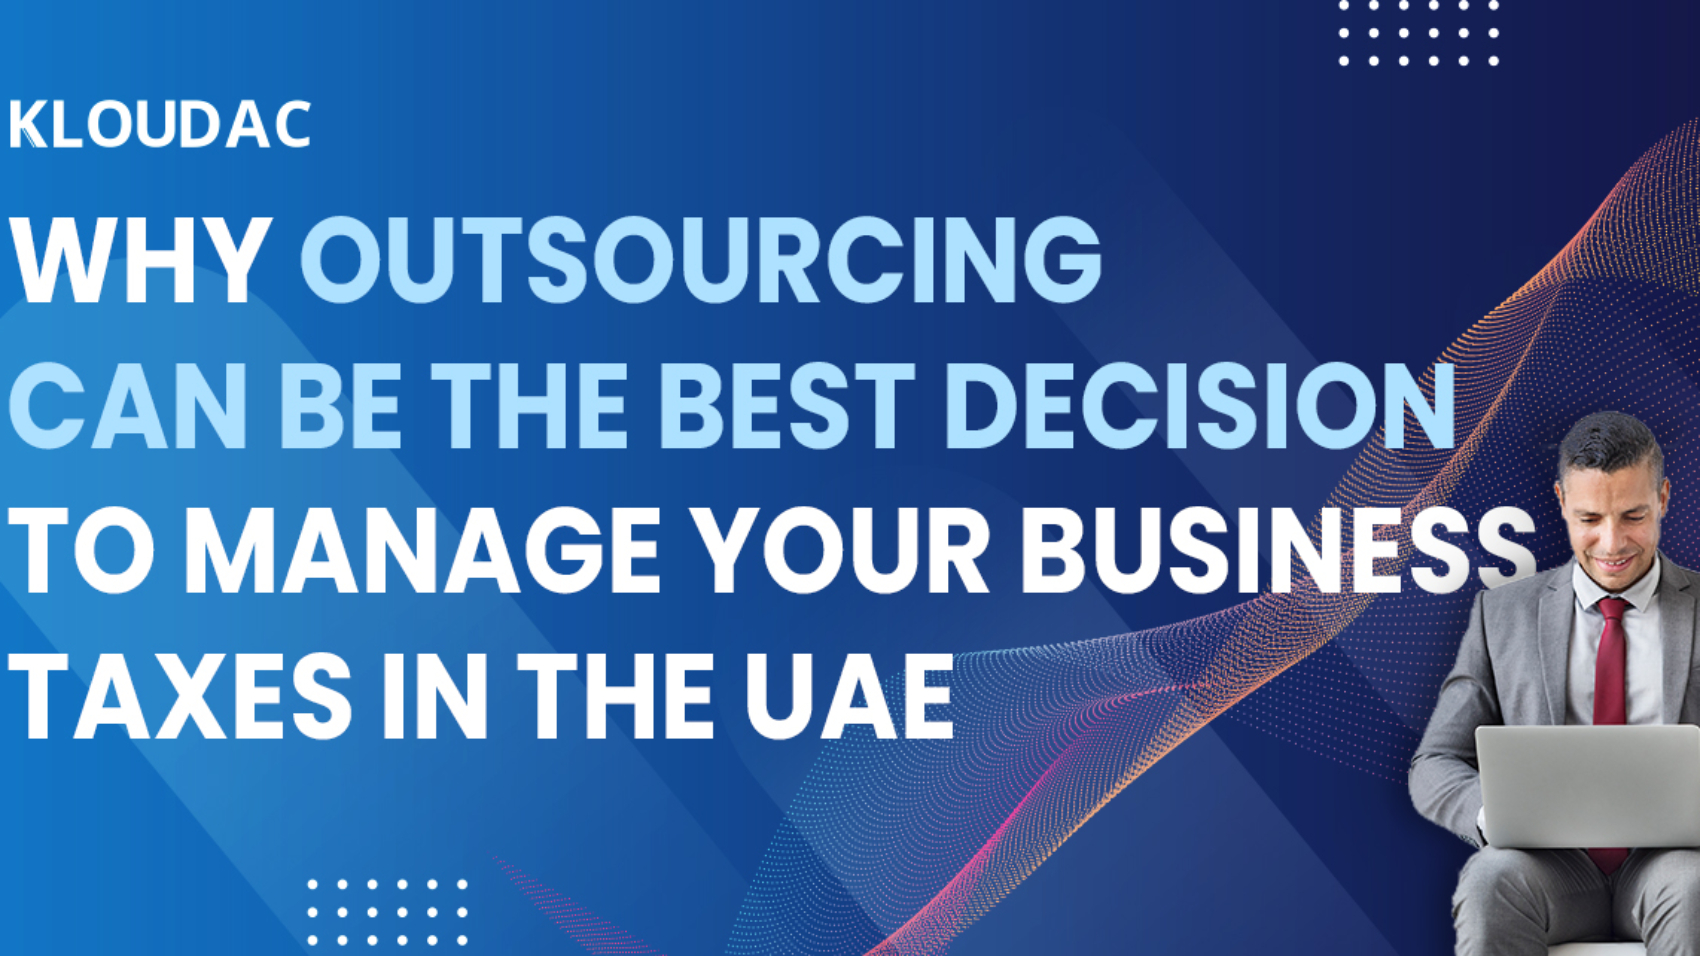 Why outsourcing can be the best decision to manage your business taxes in the UAE